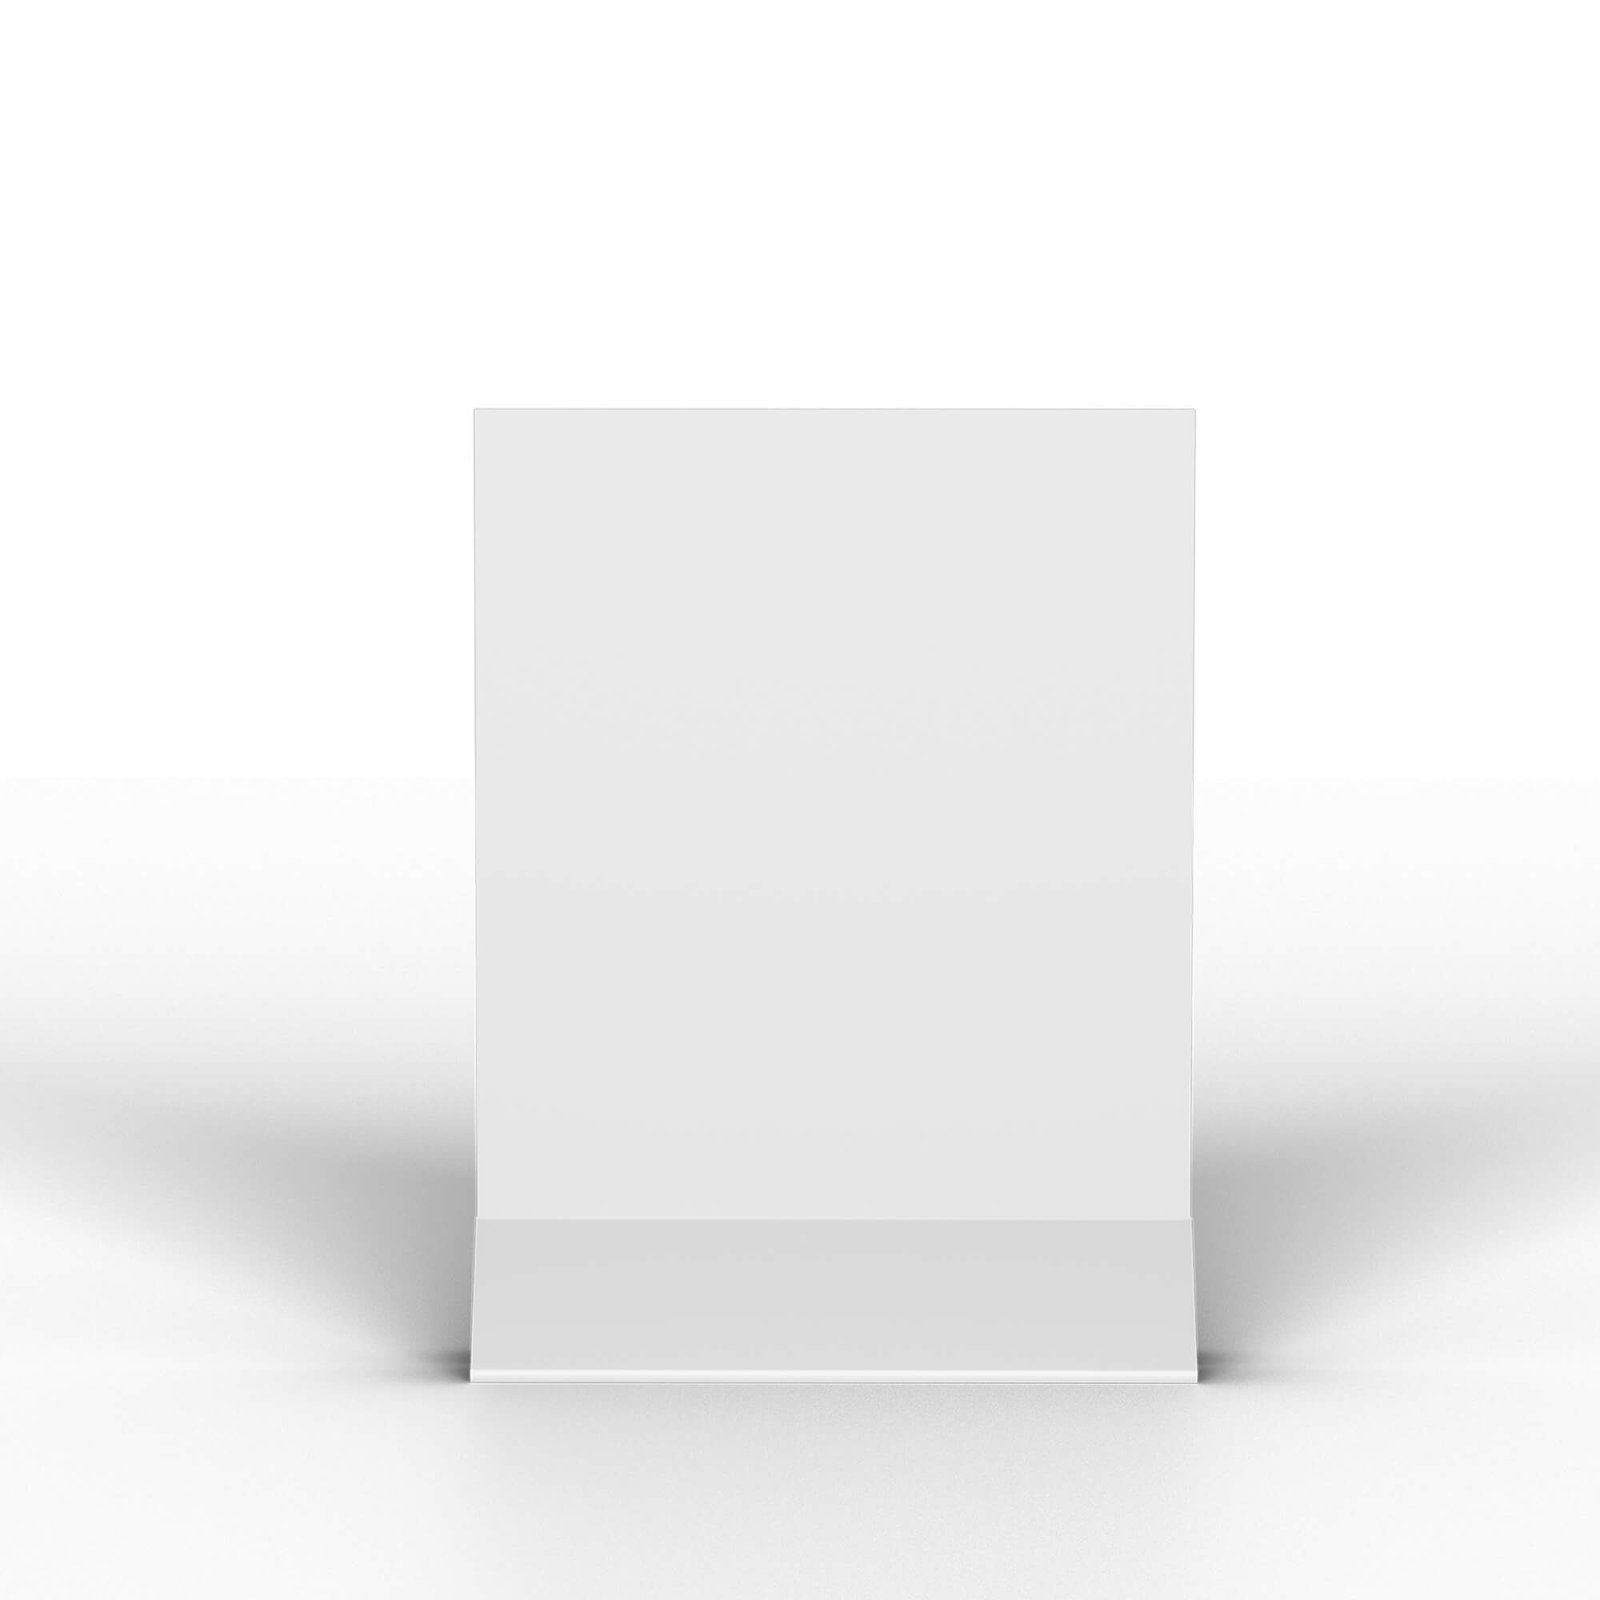 Blank Free Place Card Mockup PSD Template